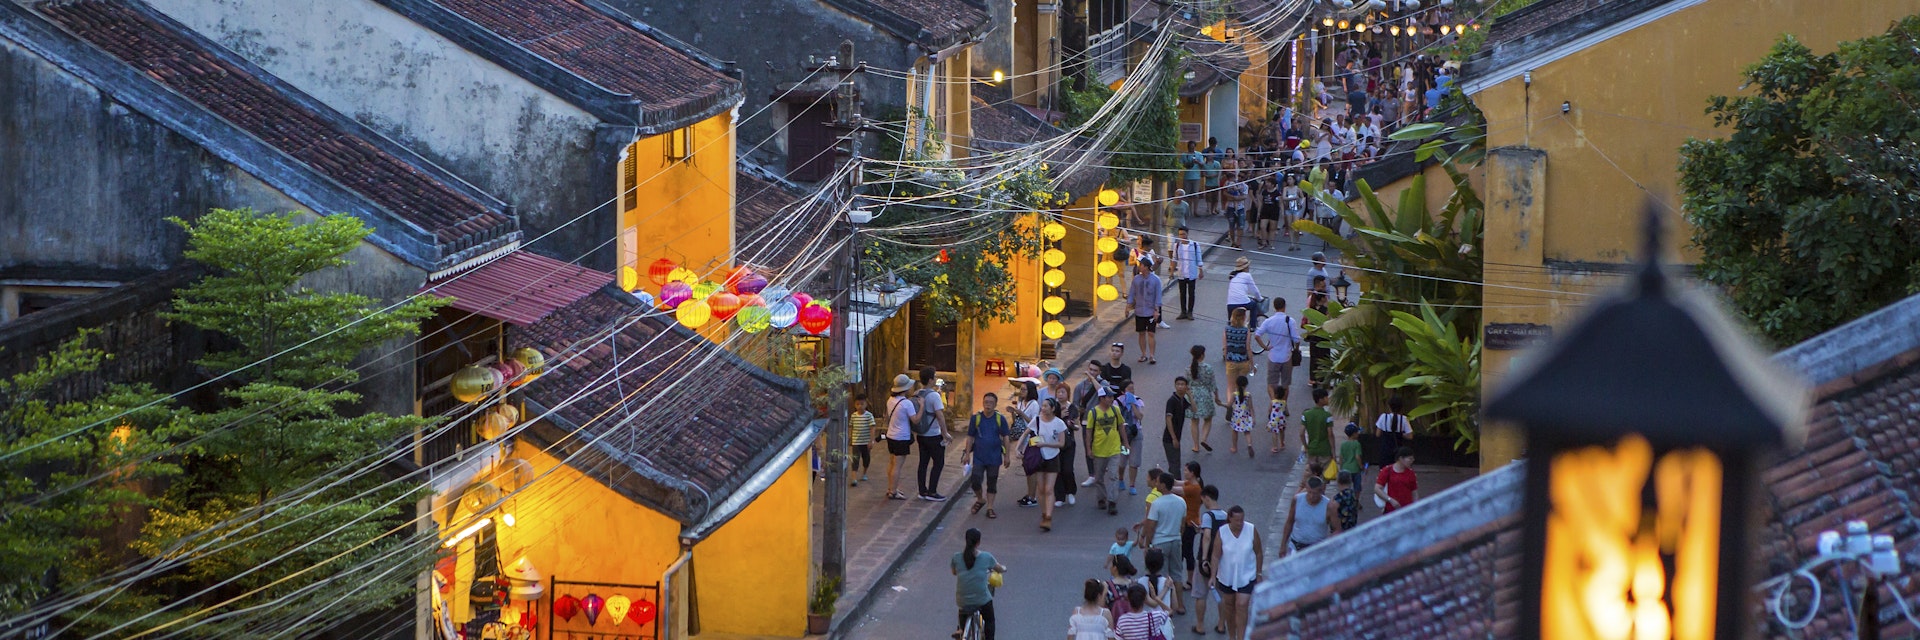 People walk down the colonial streets in historic old town Hoi An.